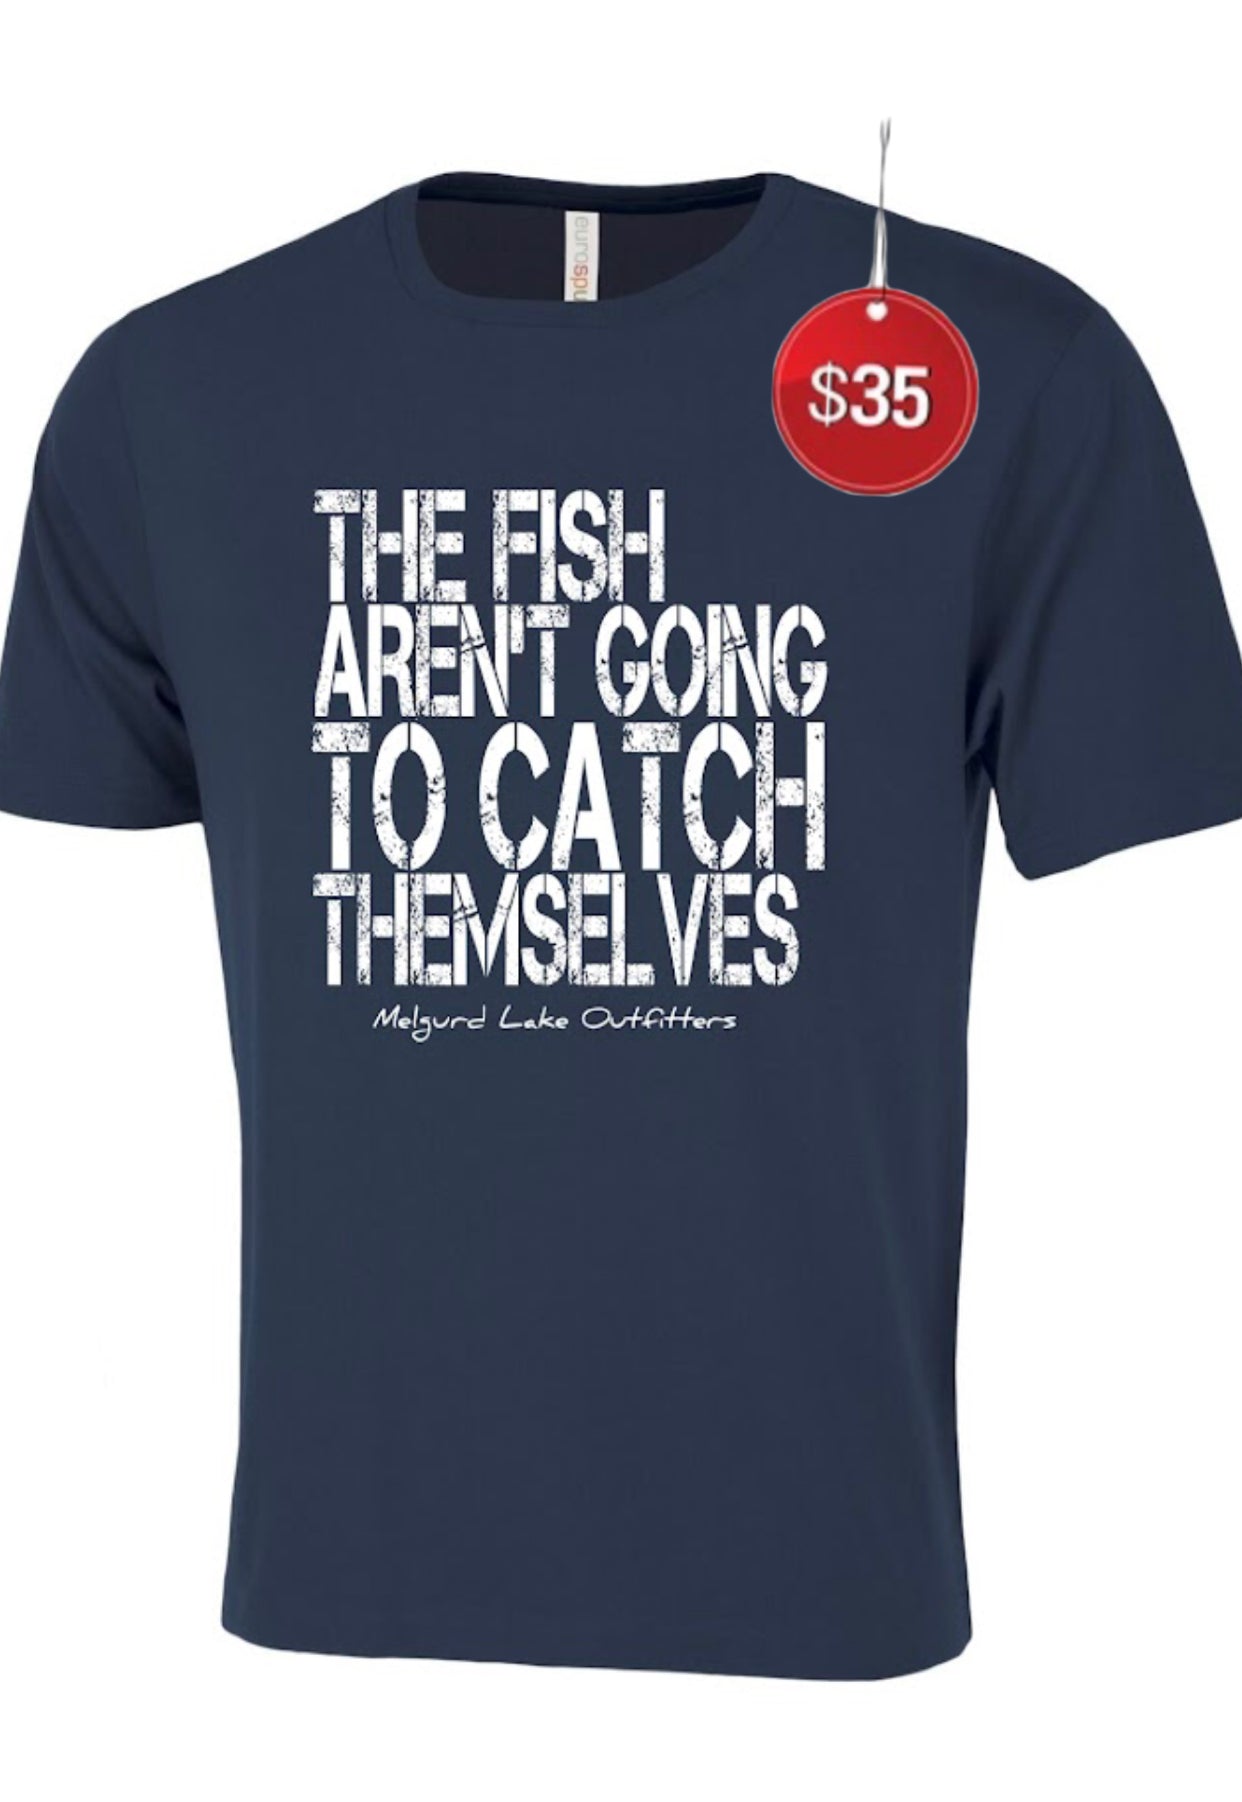 Limited Edition Catch Themselves Navy Tee - $15 Discount taken at chec –  Melgurd Lake Outfitters